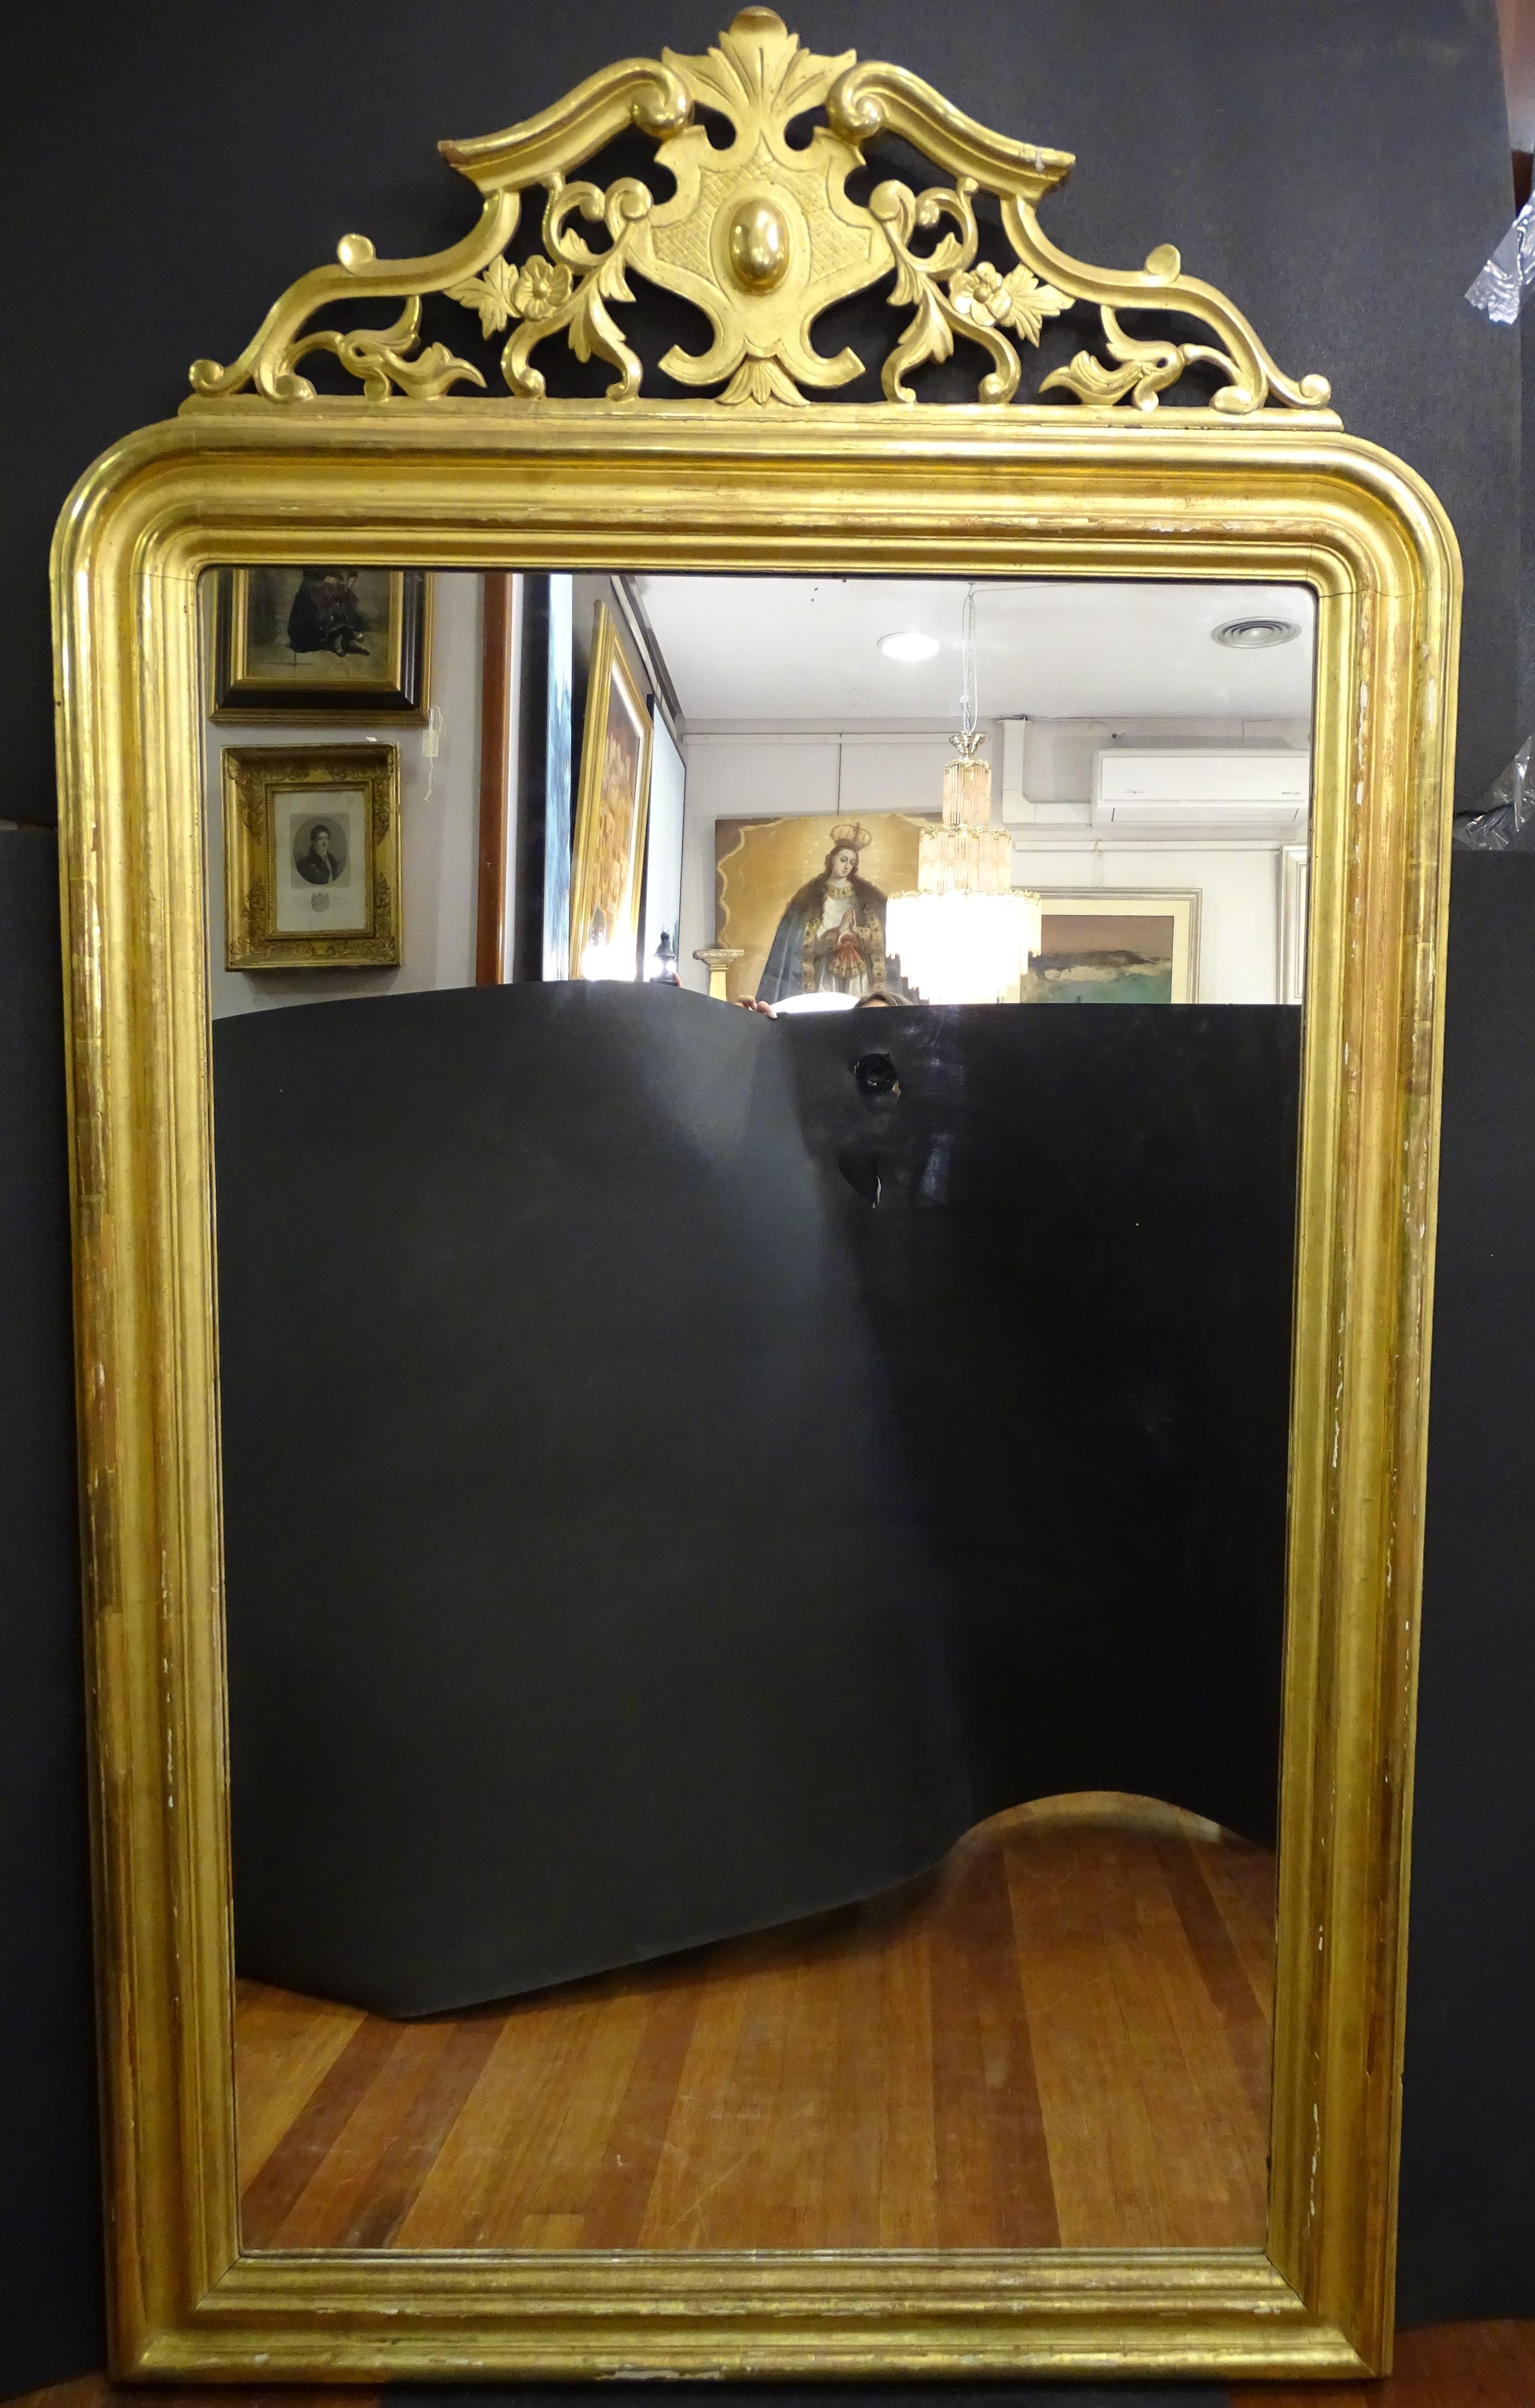 Hand-Carved 19th Century French Mirror Trumeaumirror, Gild and Carved Wood